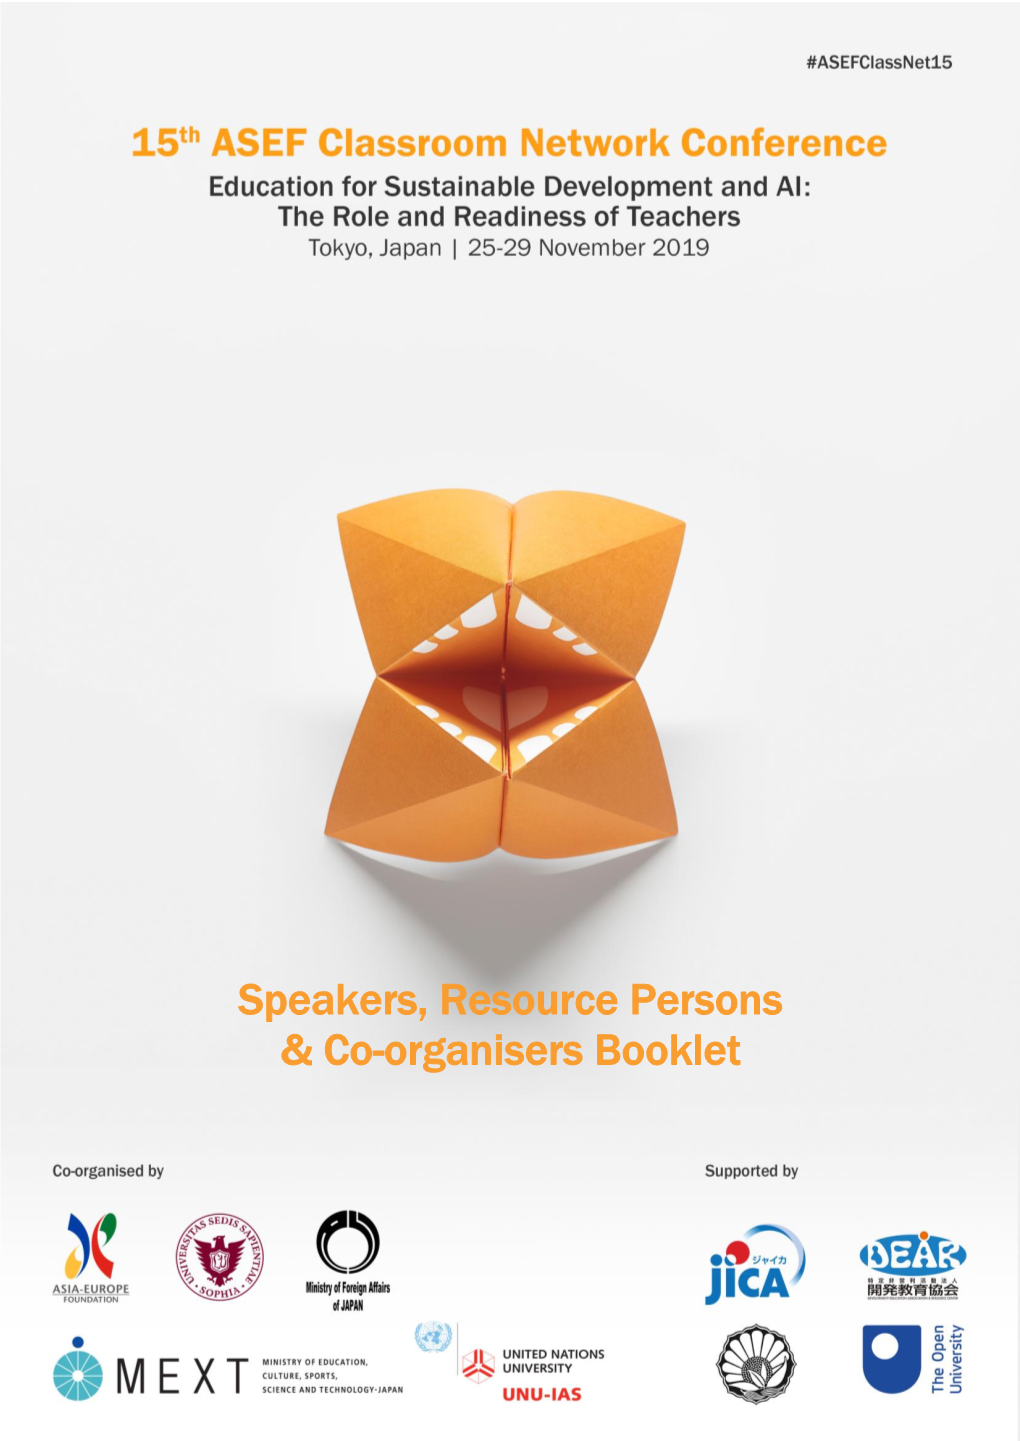 Speakers, Resource Persons & Co-Organisers Booklet